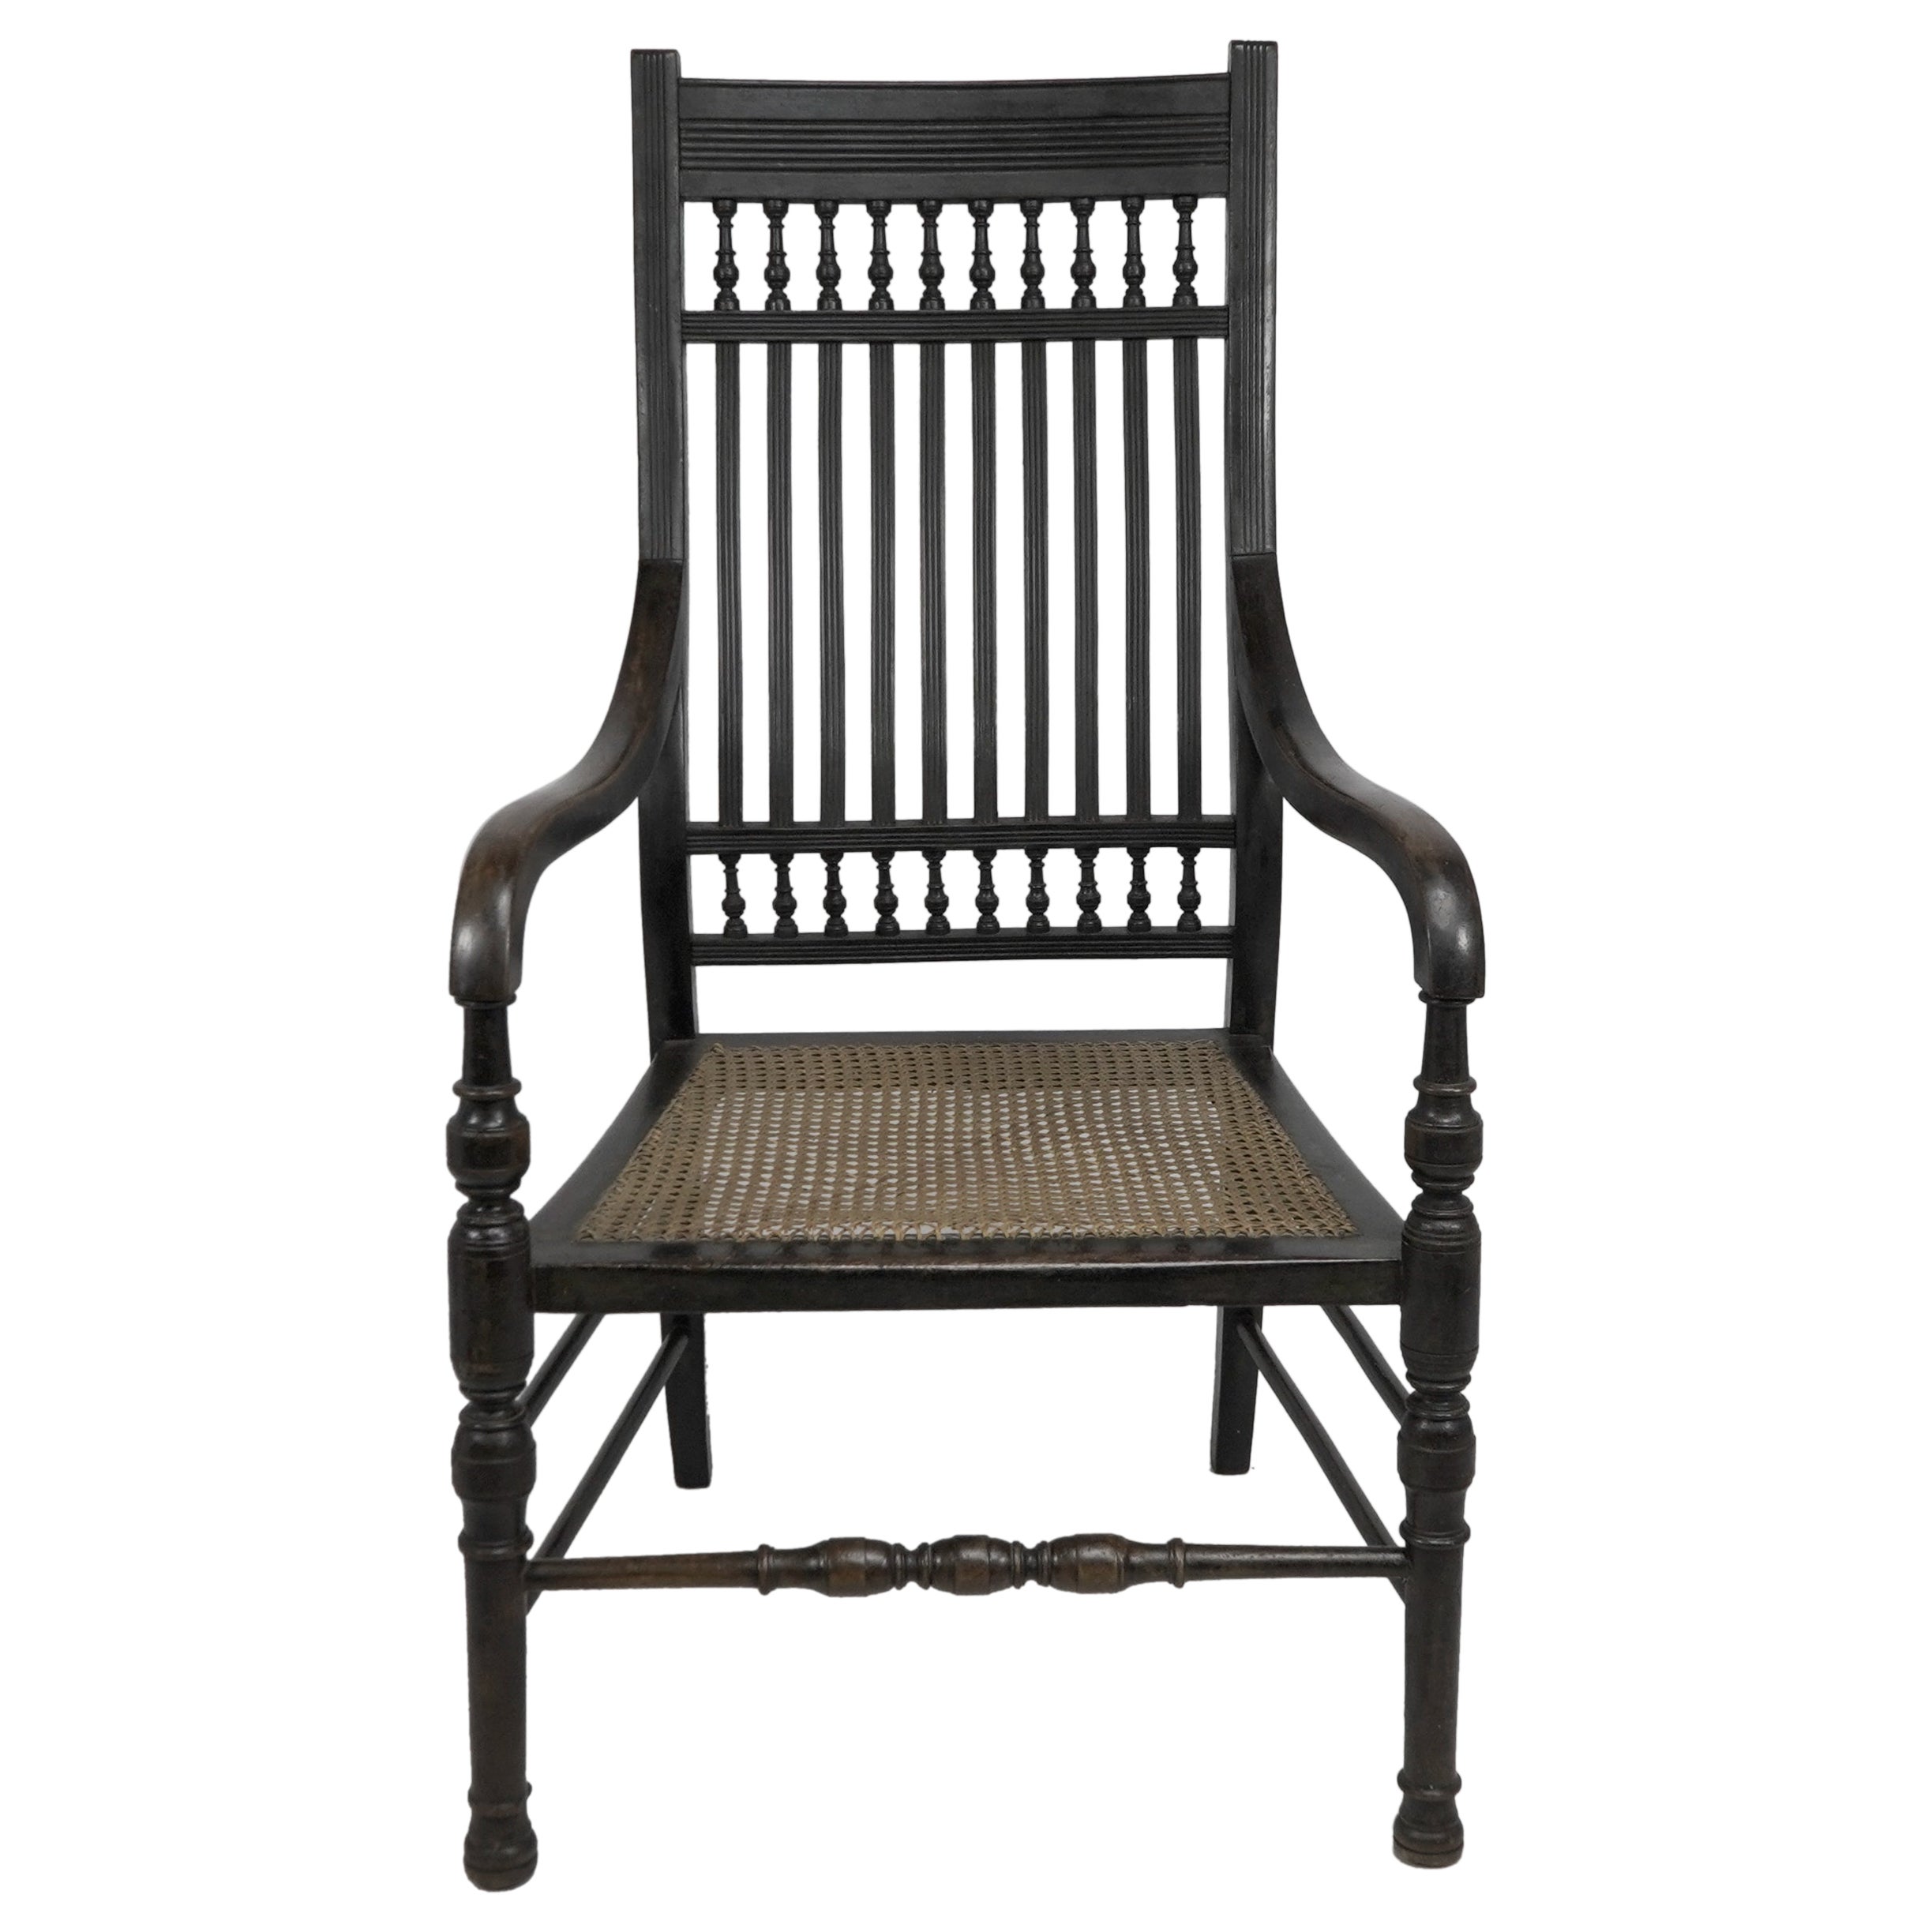 E.W. Godwin attributed, probably made by William Watt. An Aesthetic Movement tall back ebonized armchair. The turnings are in keeping with other Godwin designs, and the arms are identical to the Old English or Jacobeam armchair. The S shaped back is